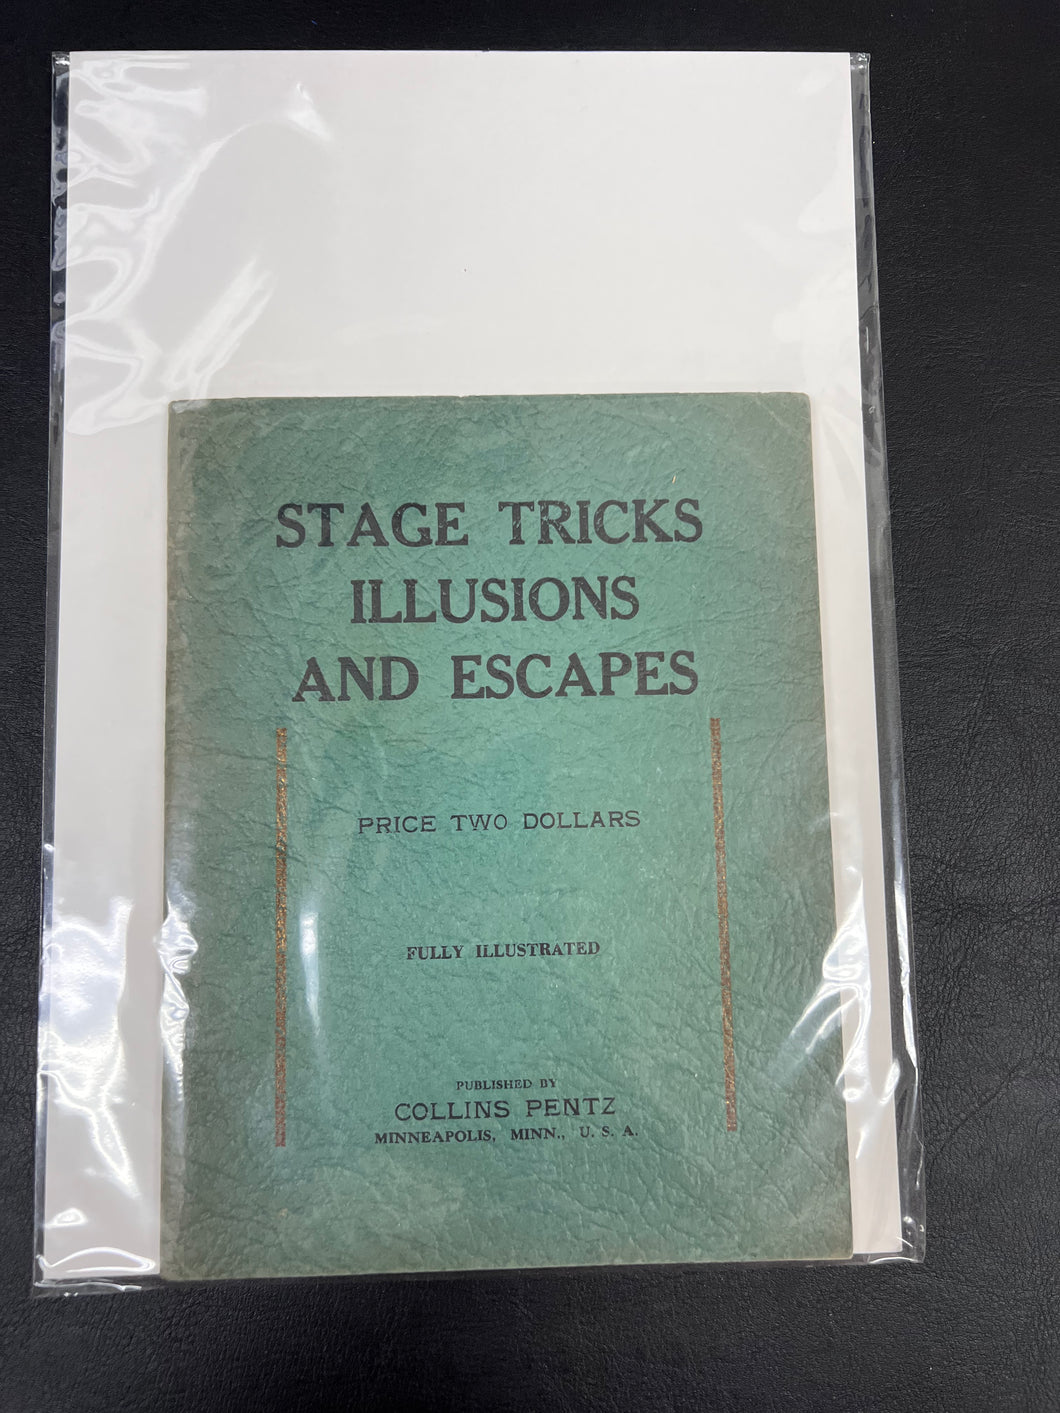 Stage Tricks Illusions and Escapes by Collins Pentz